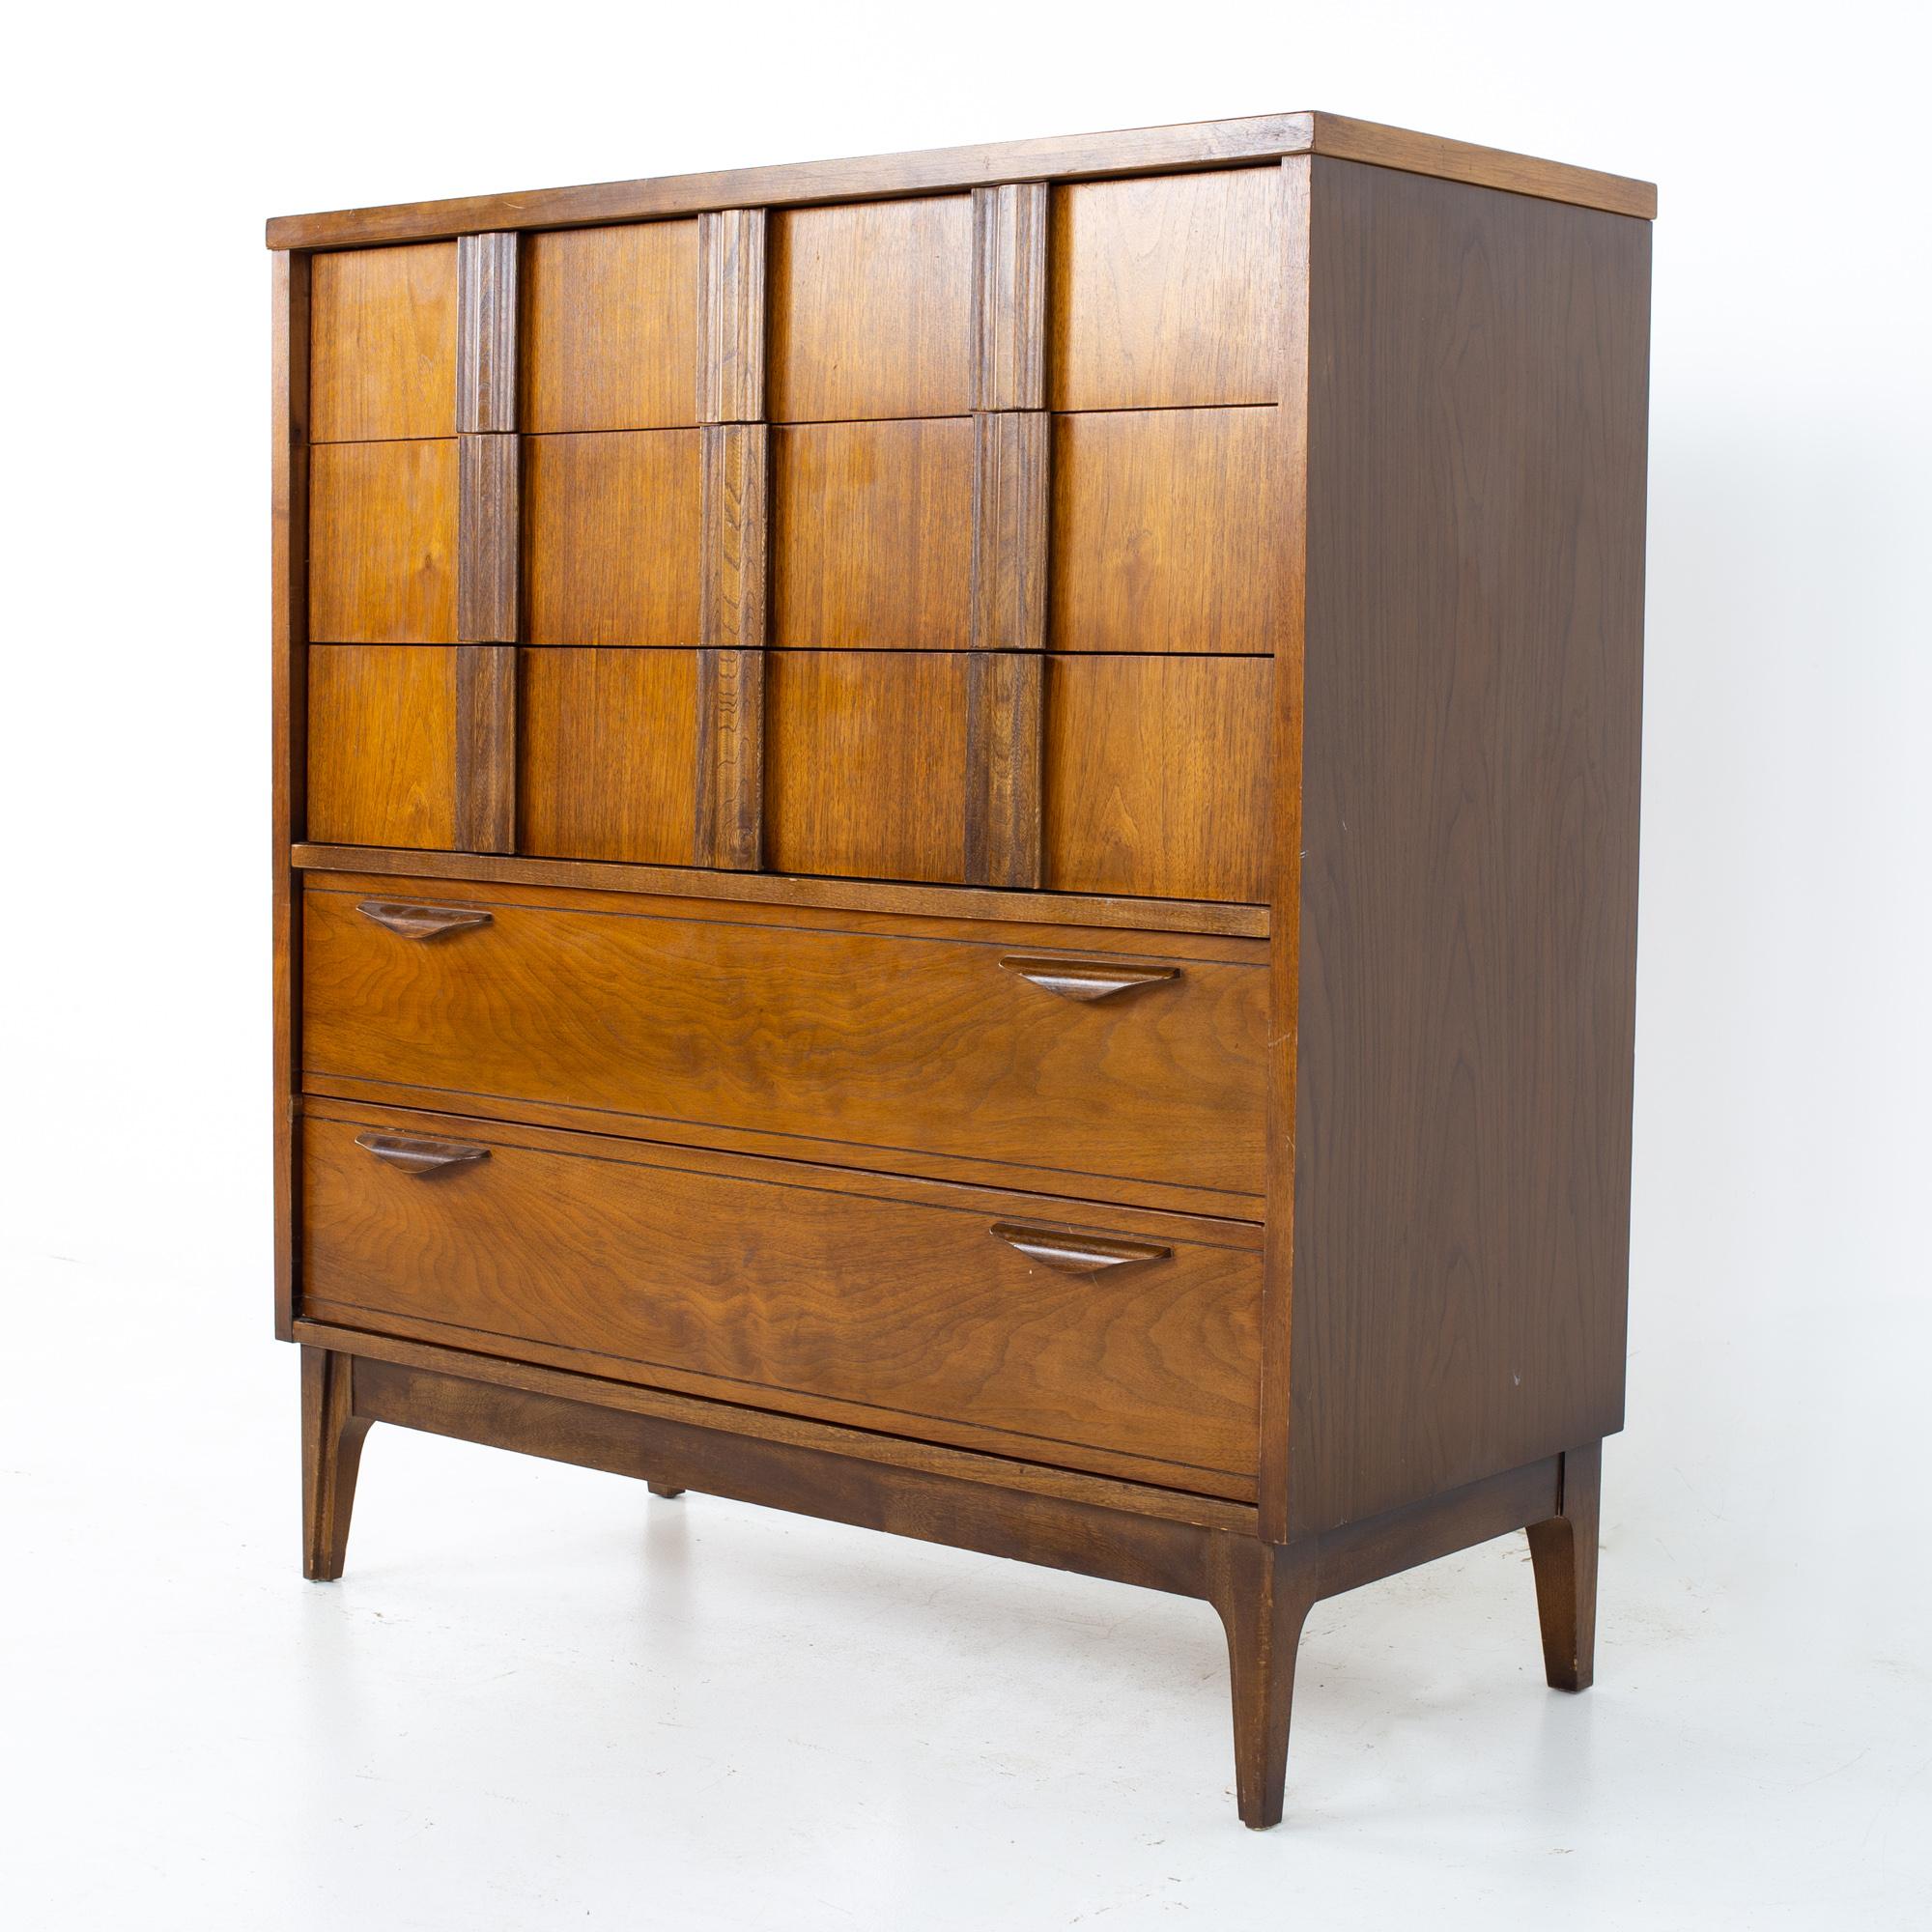 Kroehler mid century highboy dresser
Dresser measures: 40.75 wide x 18 deep x 45 inches high

All pieces of furniture can be had in what we call restored vintage condition. That means the piece is restored upon purchase so it’s free of